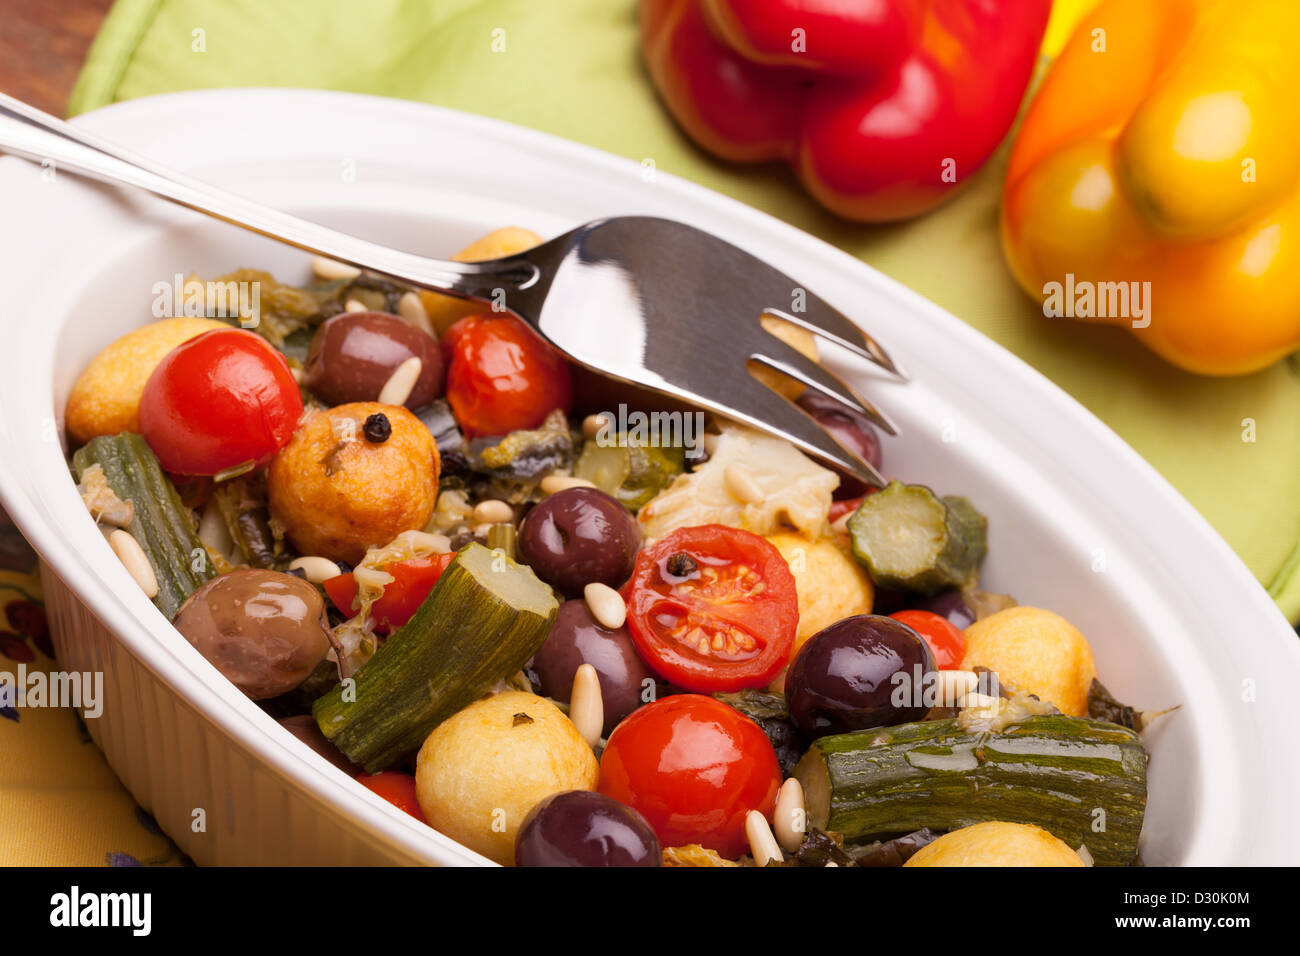 Colorful Mix Of Stewed Vegetables Stock Photo